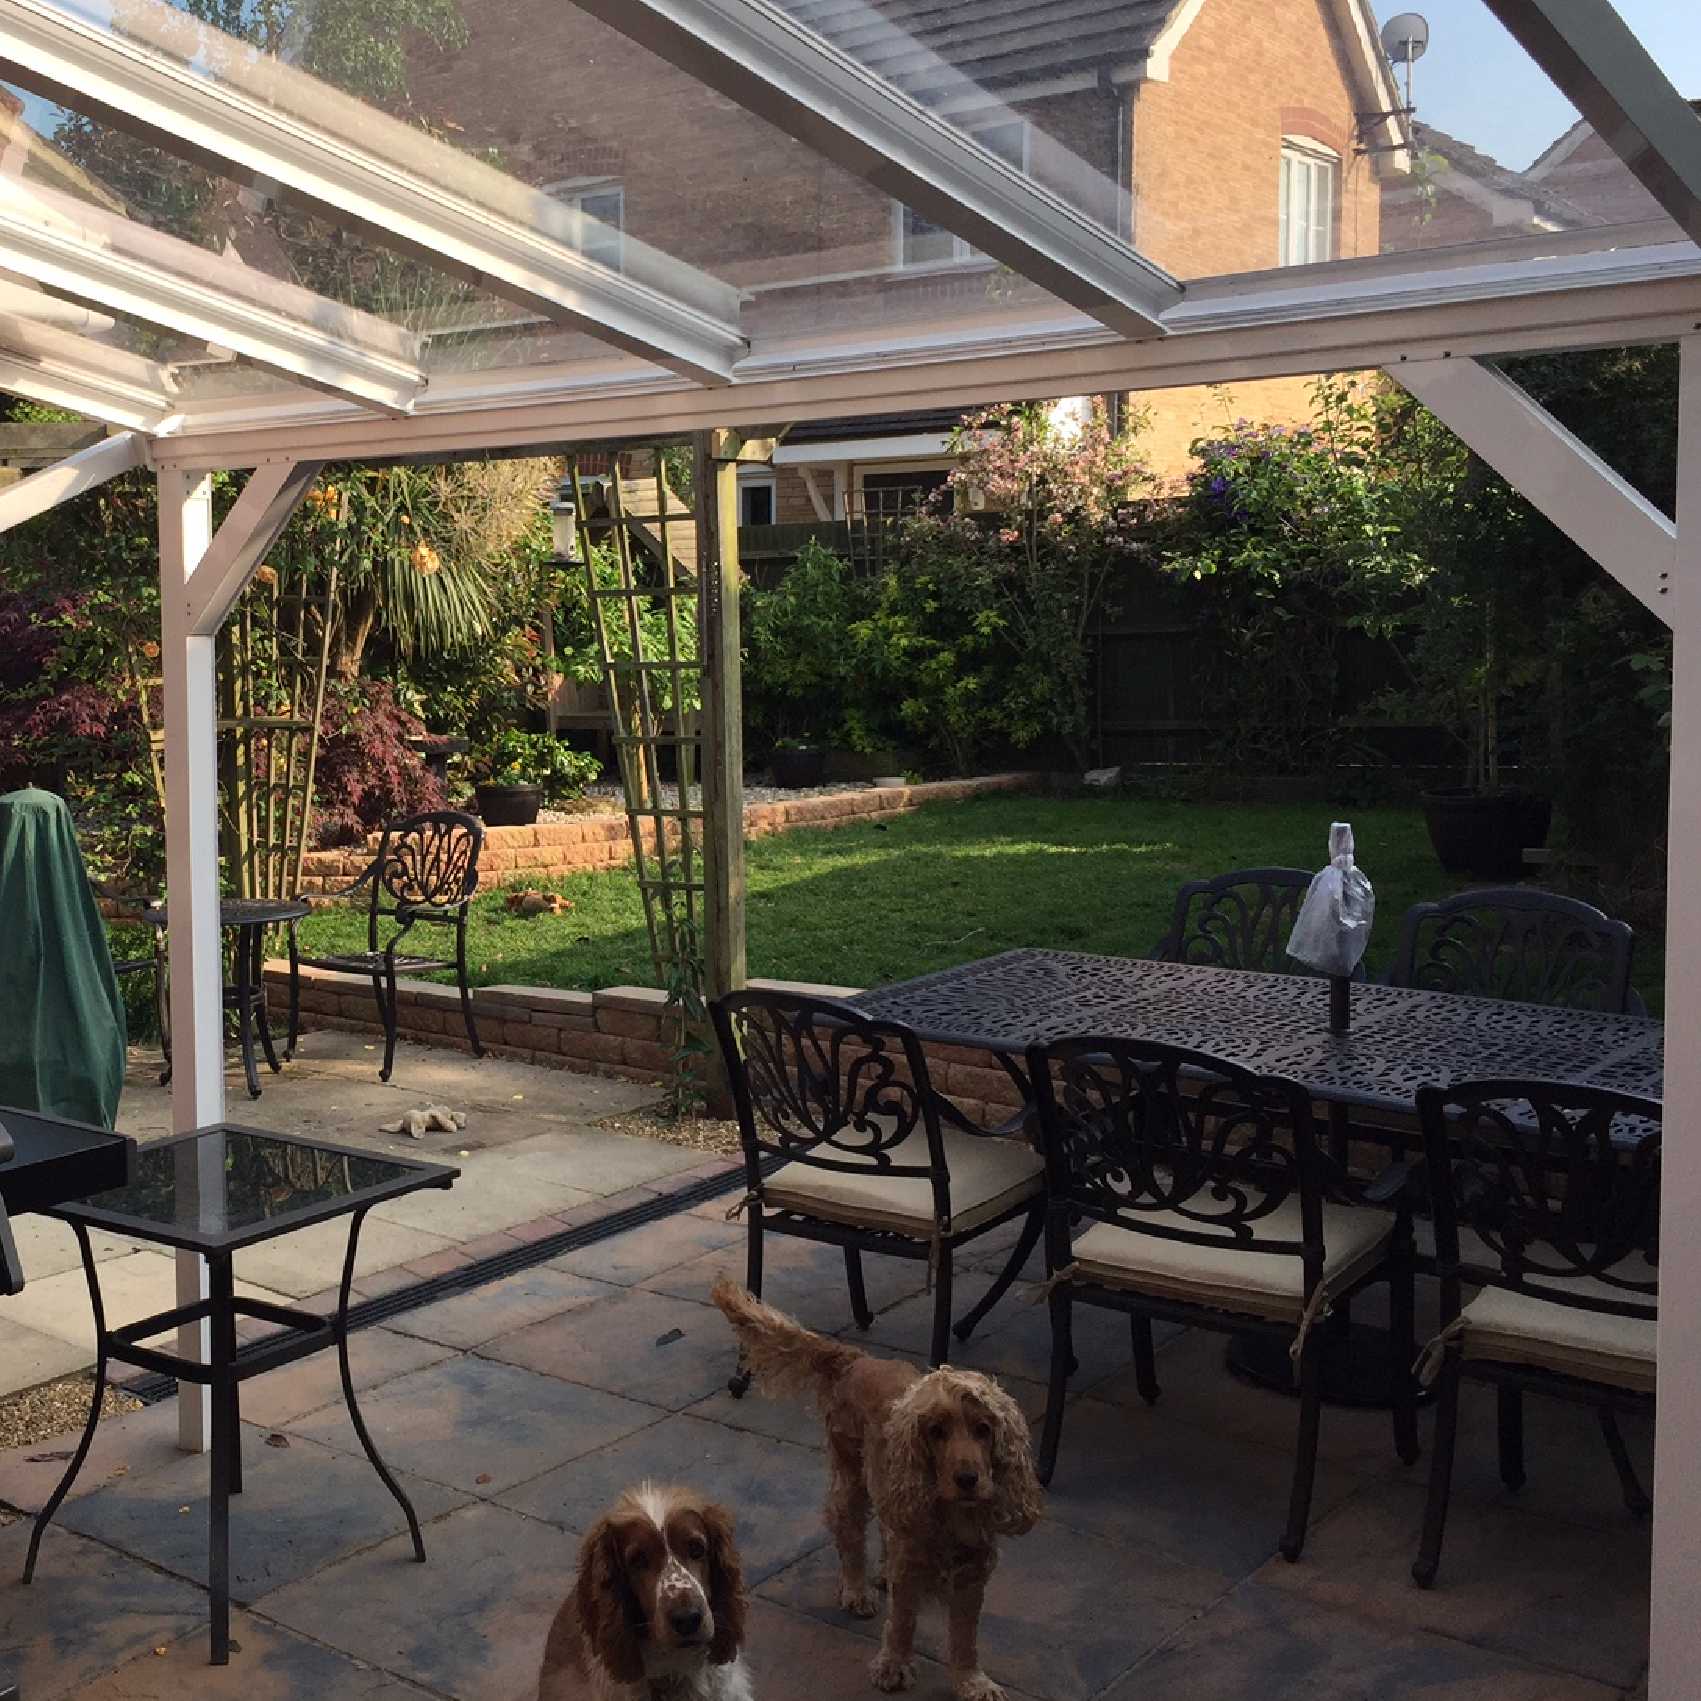 Affordable Omega Smart Lean-To Canopy, White UNGLAZED for 6mm Glazing - 7.0m (W) x 2.0m (P), (4) Supporting Posts